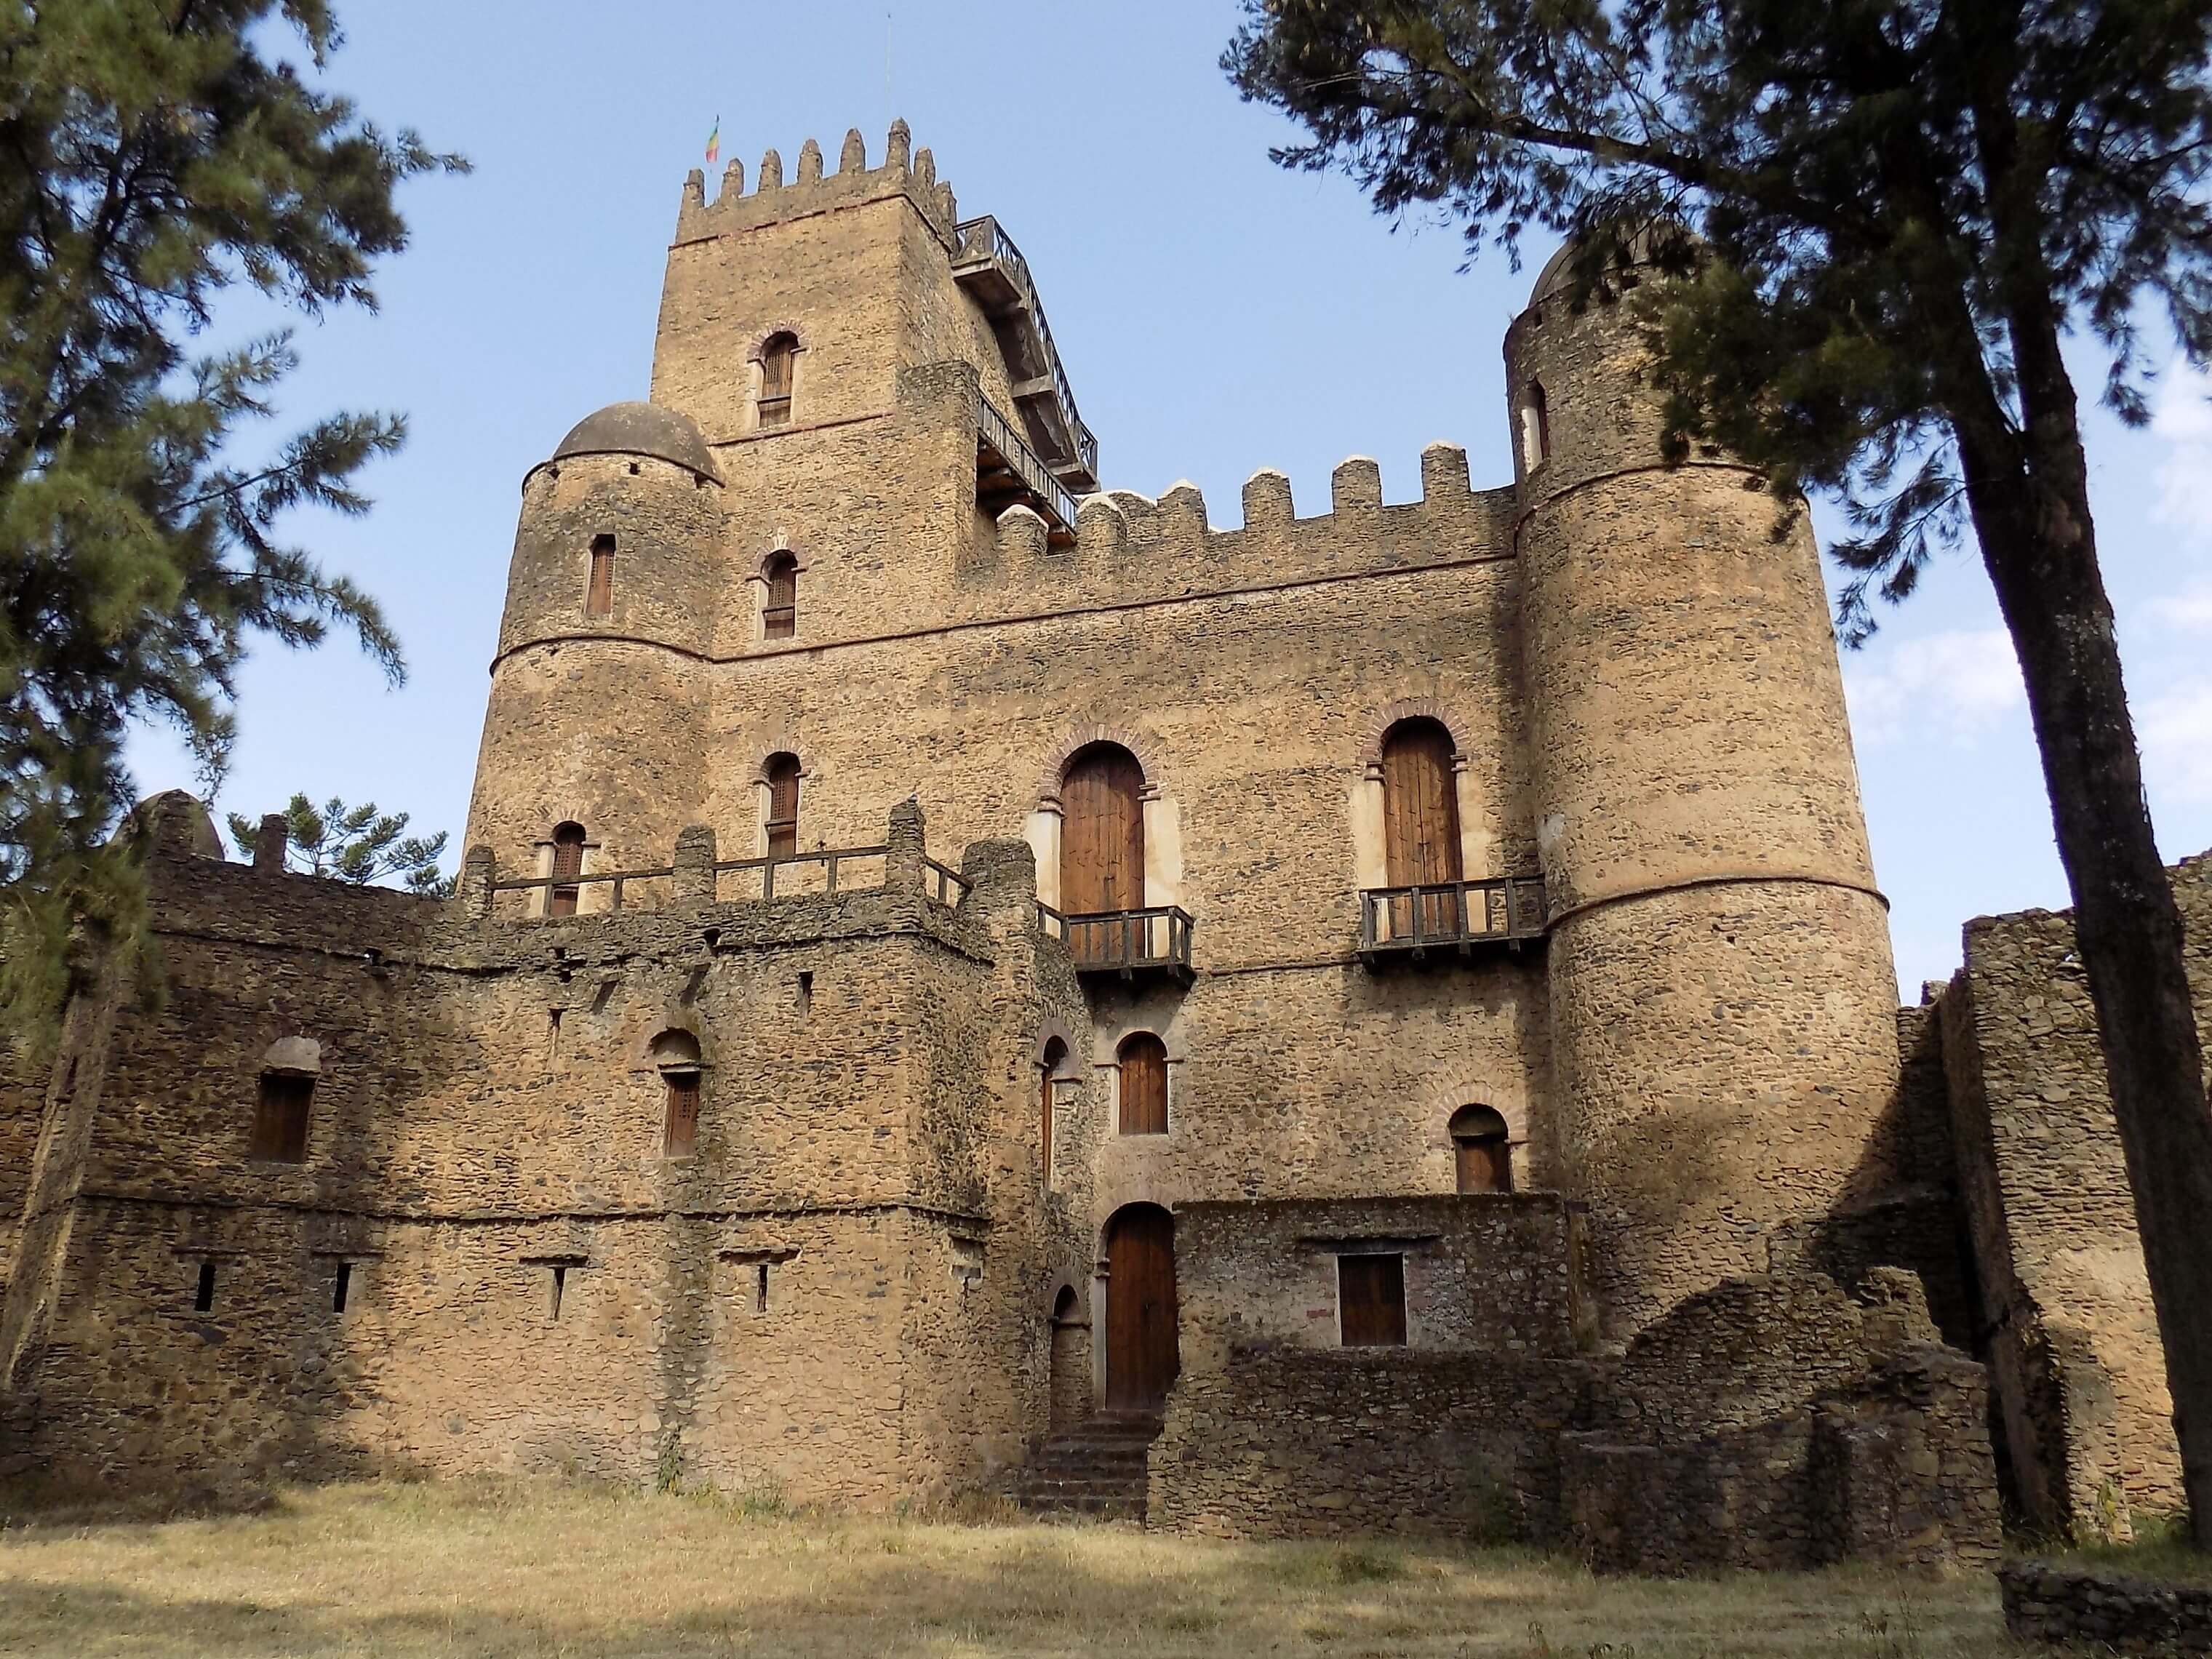 This photo shows one of Gondar's castles with its crenallations